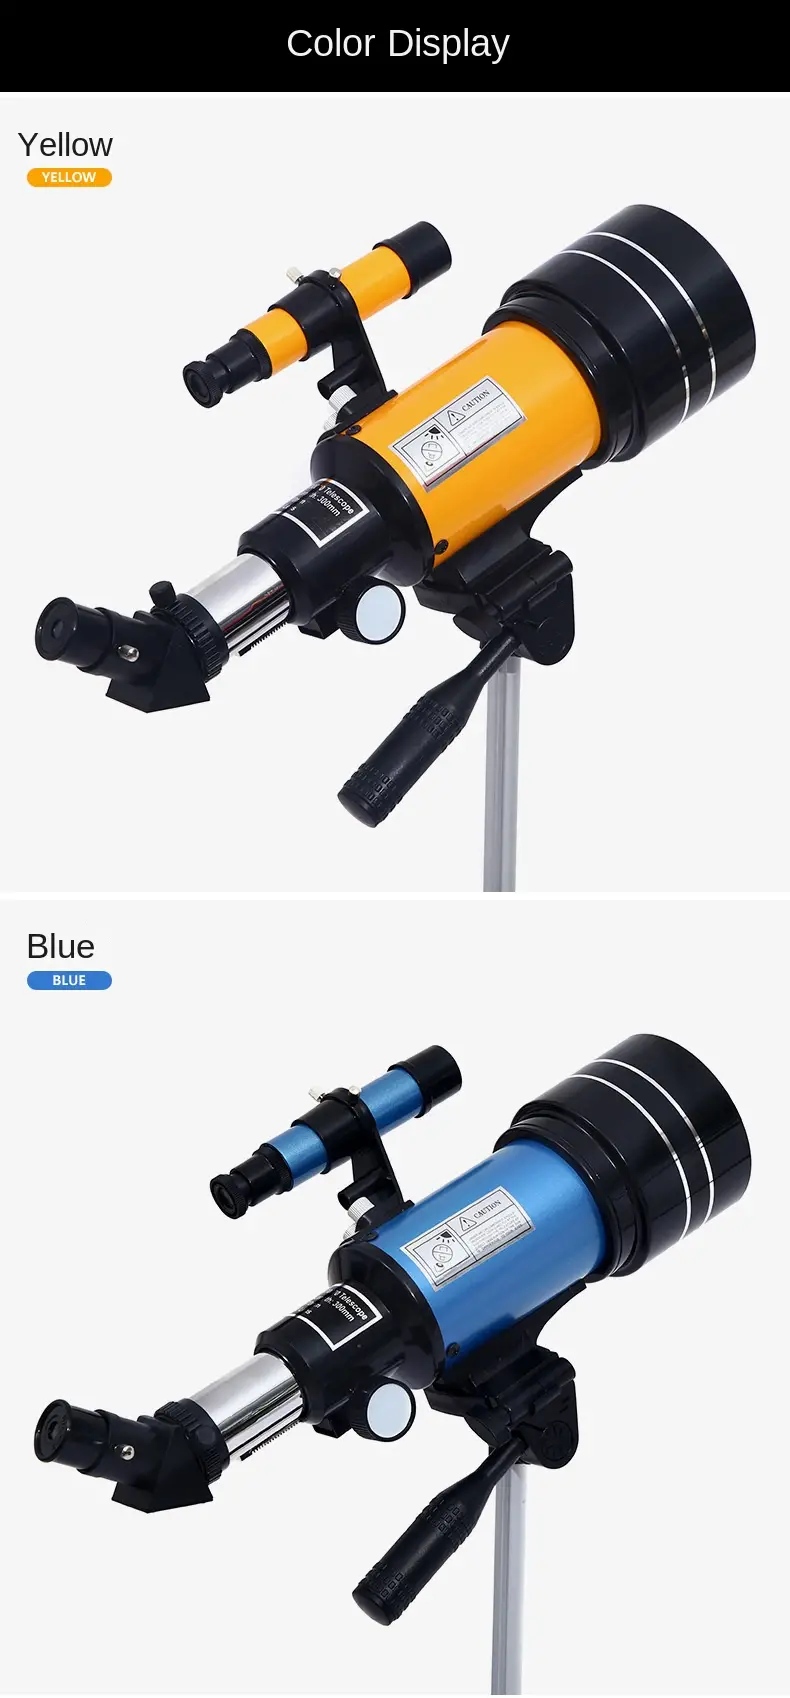 professional astronomical telescope 150 times zoom high power portable tripod night vision deep space star view moon universe details 7